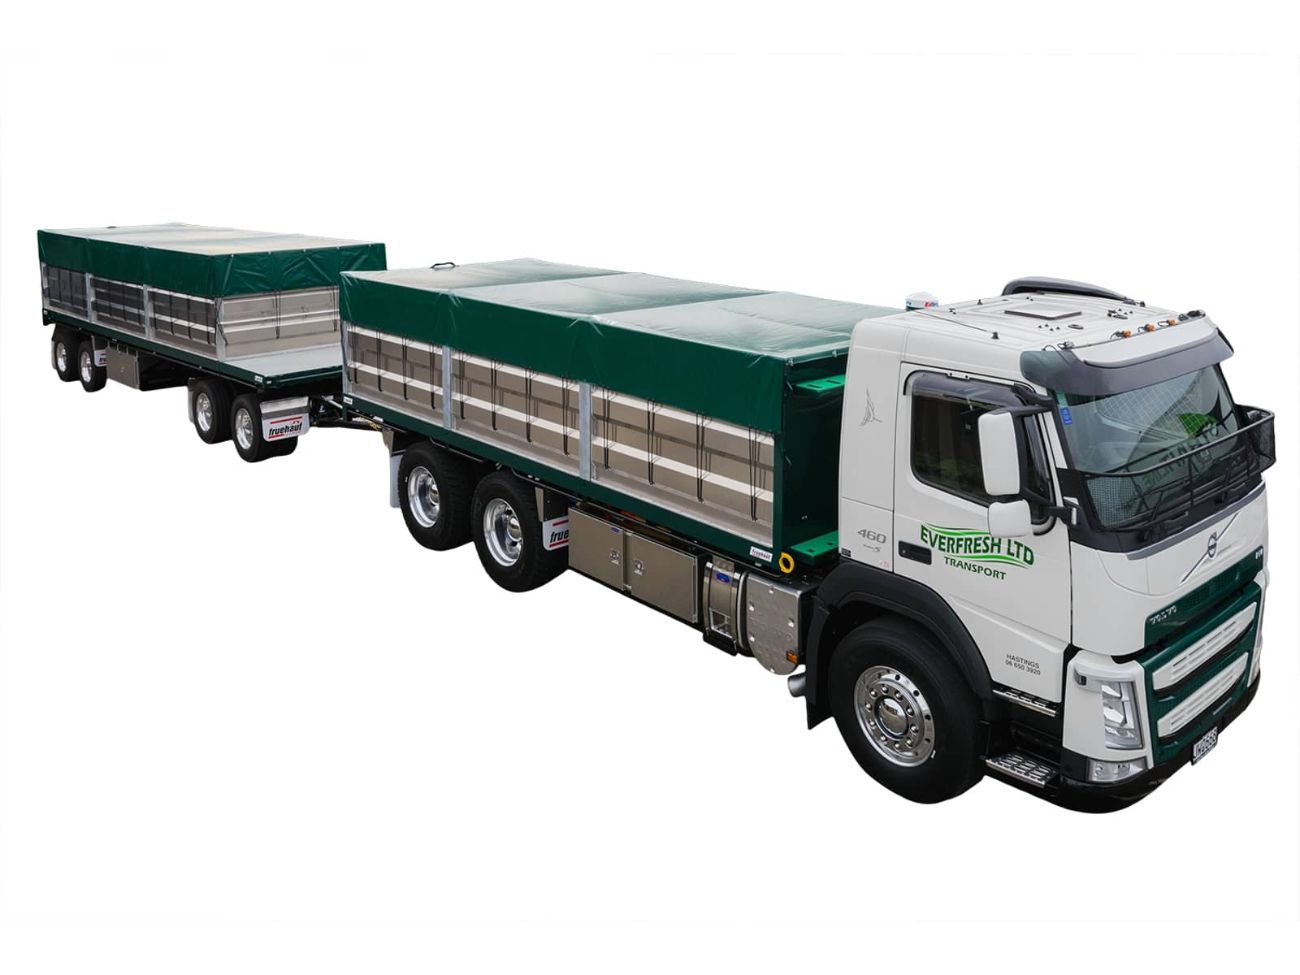 Truck and trailer with green roll over cover.